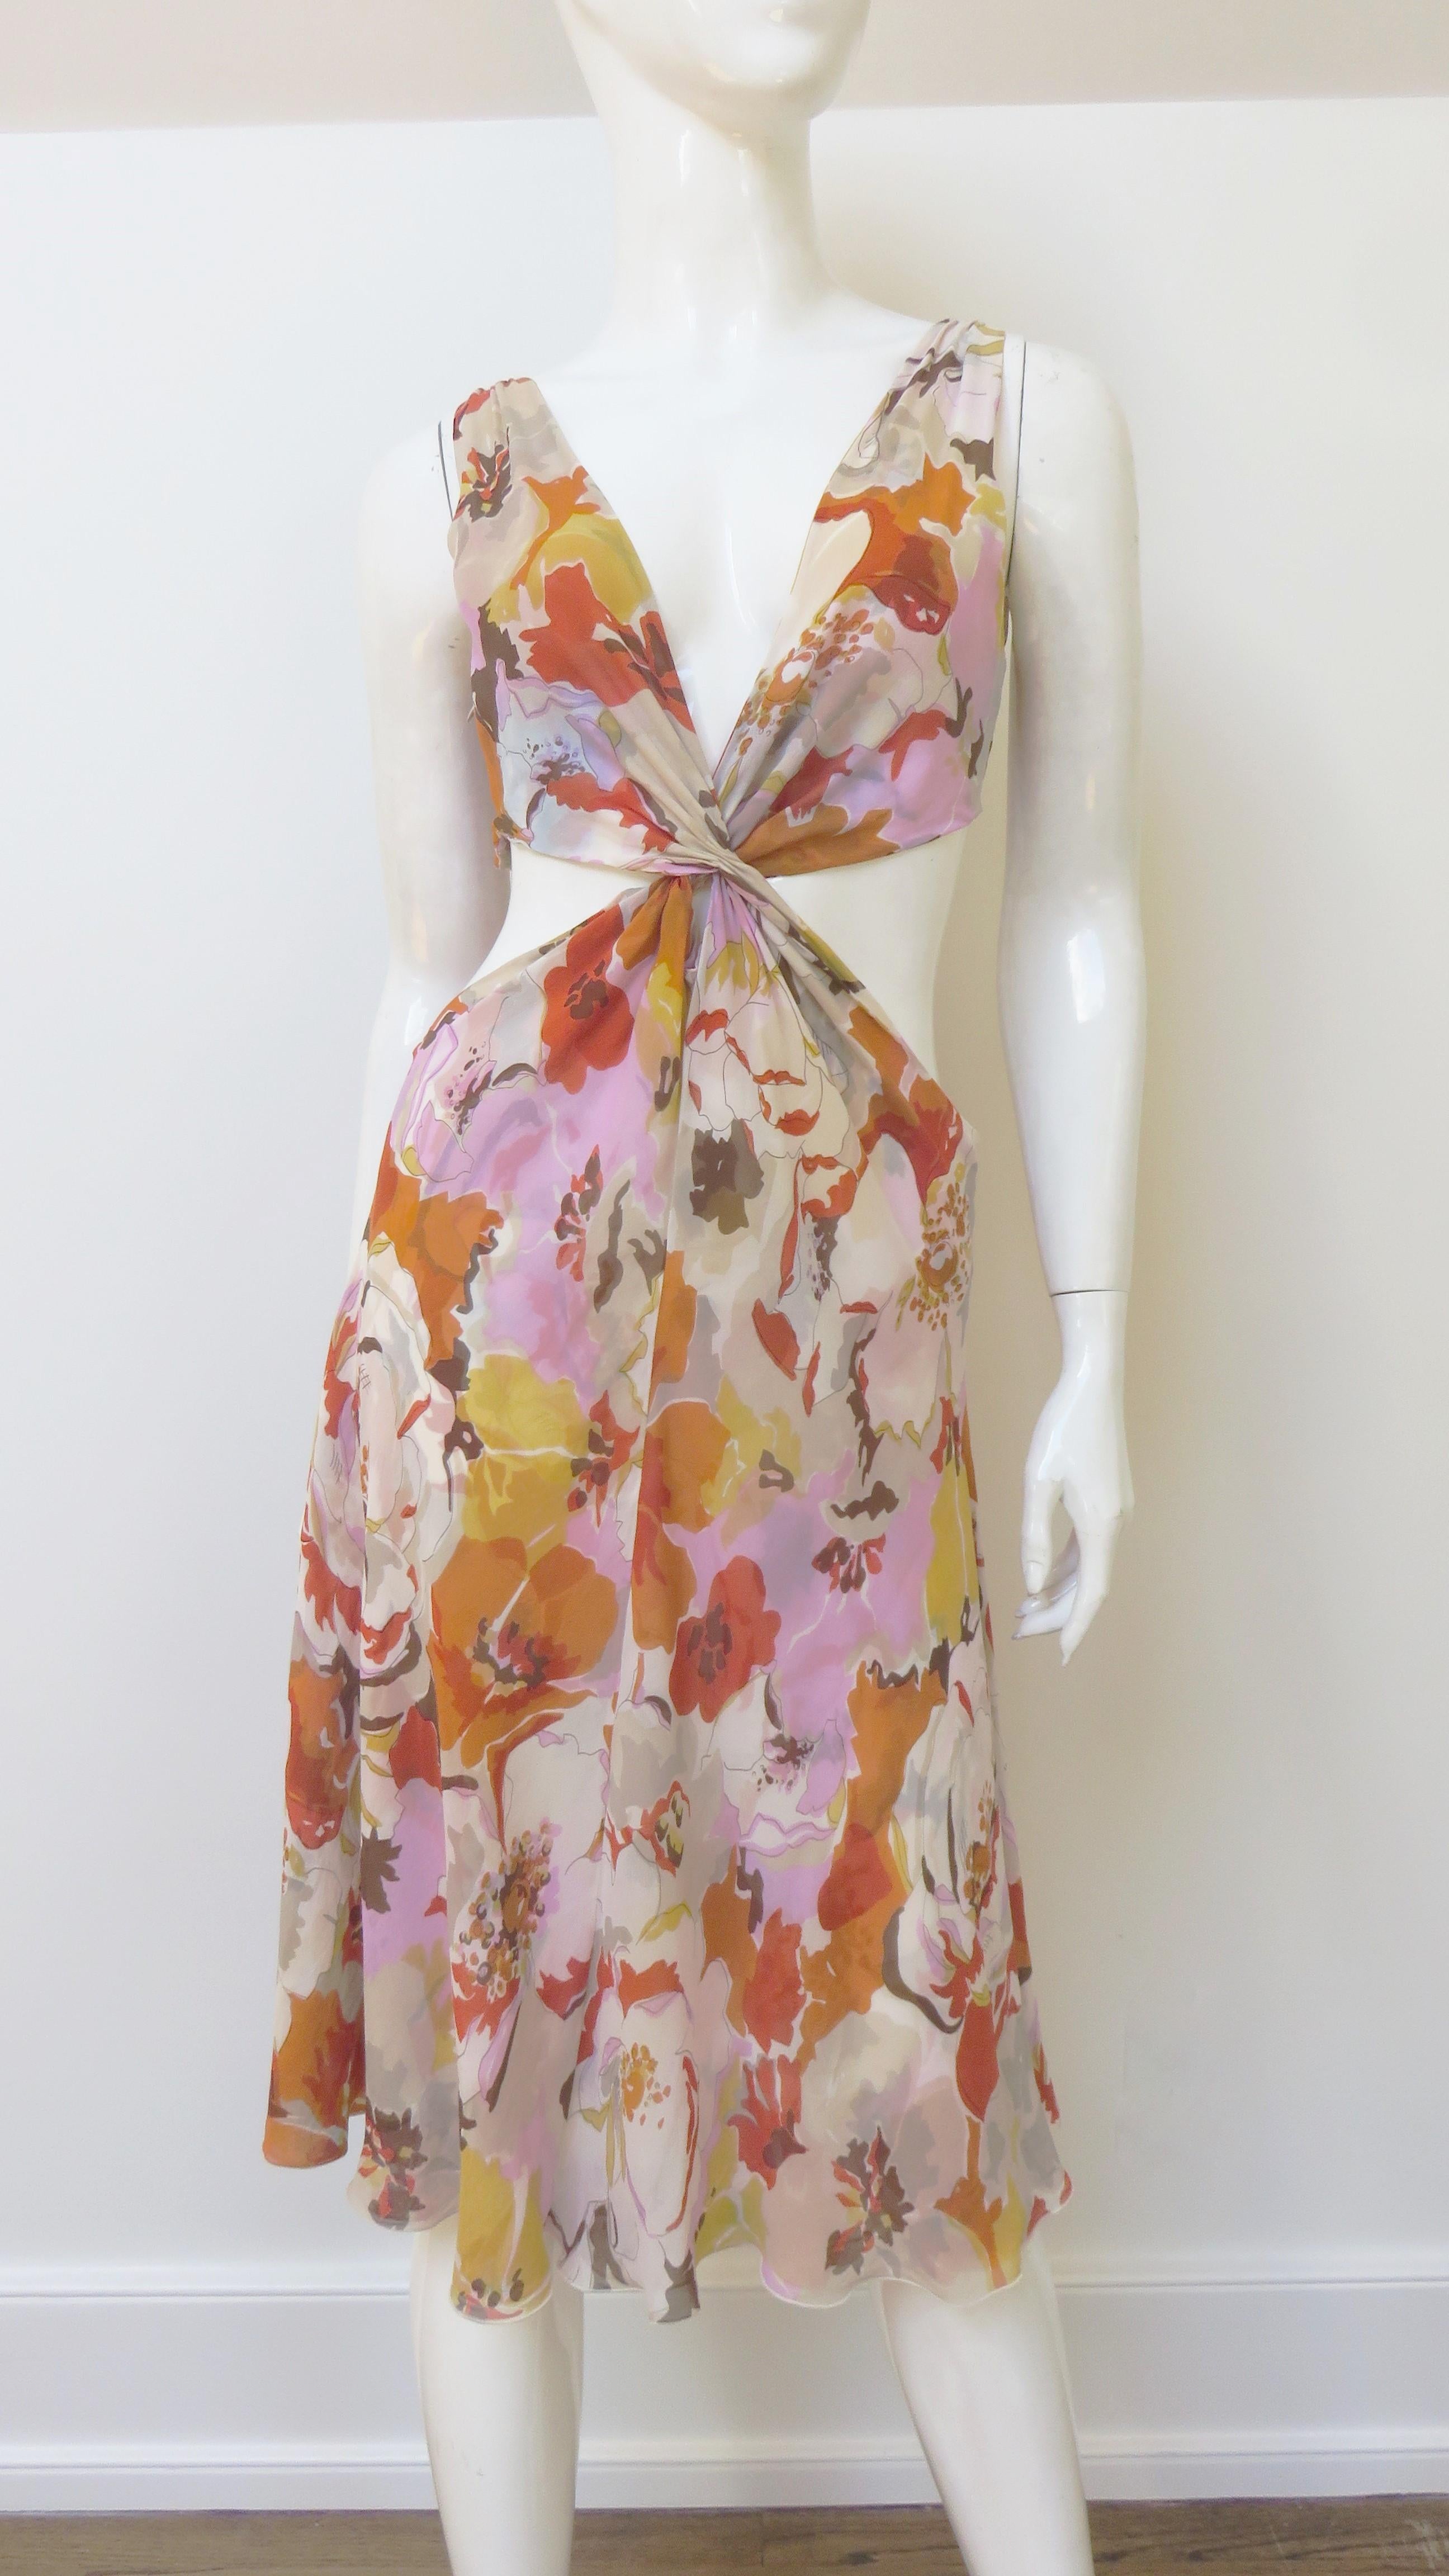 A gorgeous flower print silk dress from Valentino in pink, orange, off white, gold and brown.  It is sleeveless with a plunging neckline front and back, cut outs at the waist and a full skirt.  It is lined in same fabric and has a side zipper.
Fits